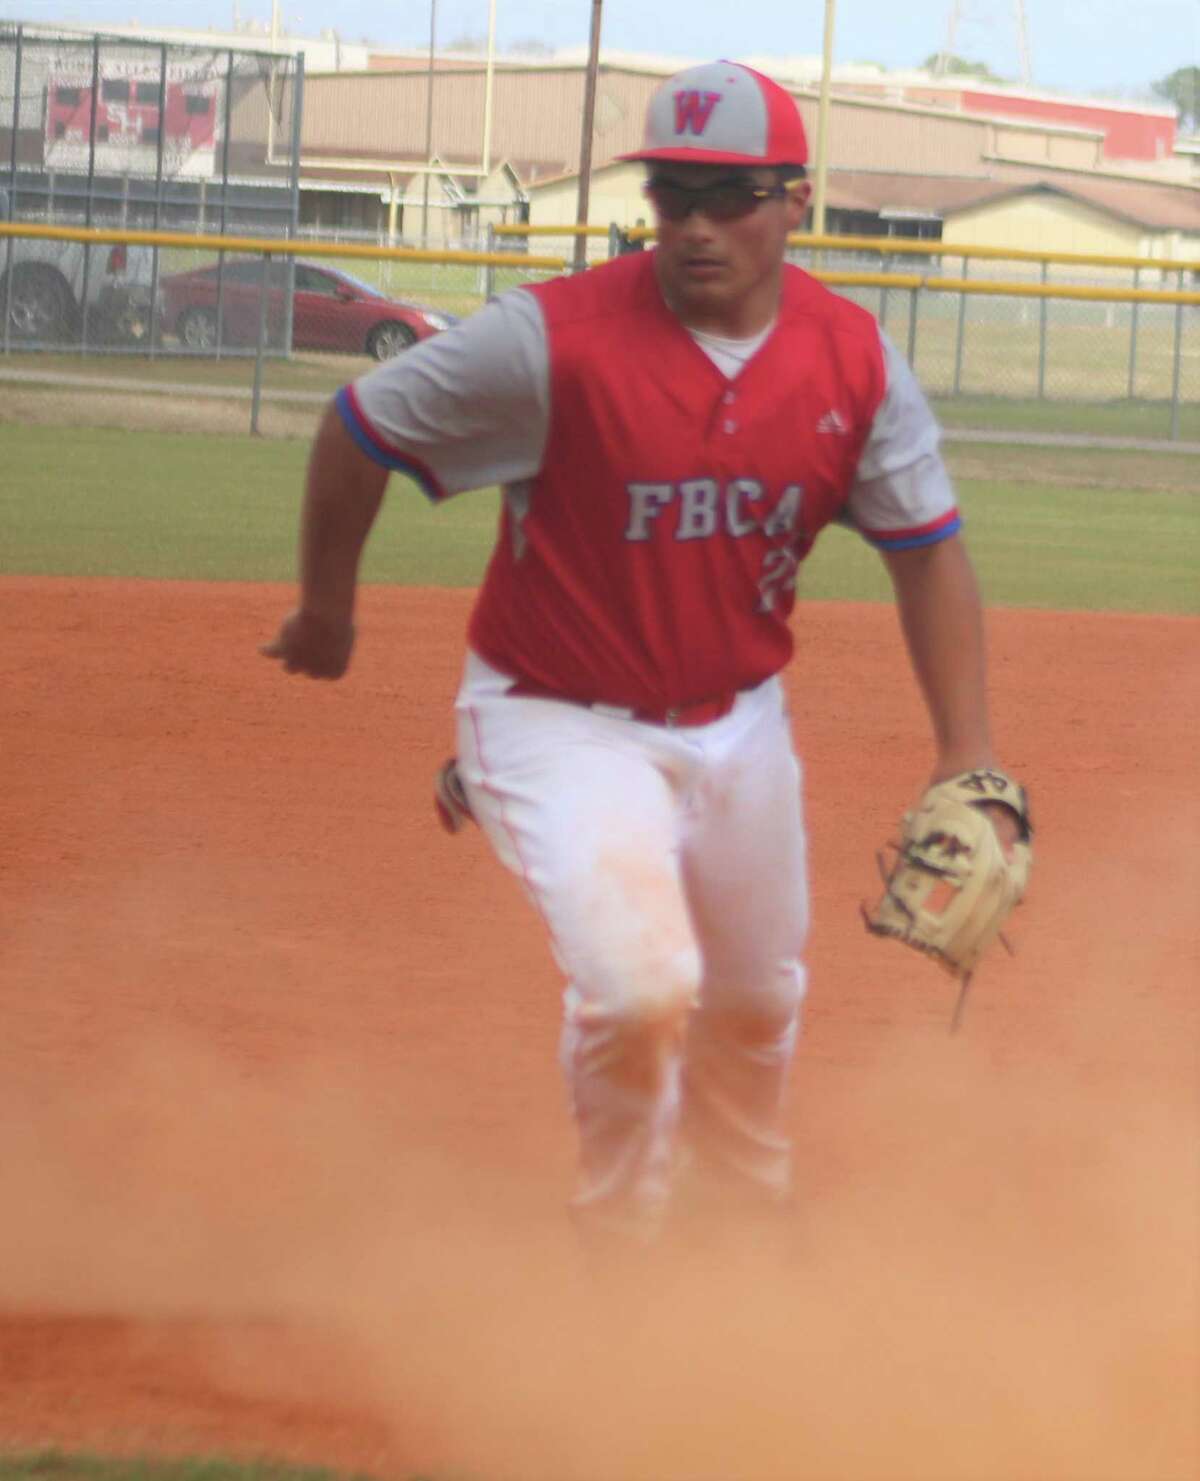 Aiden Martinez was named to First Team by the district coaches in their recent voting along with Canon Thompson and Ryan Towe.